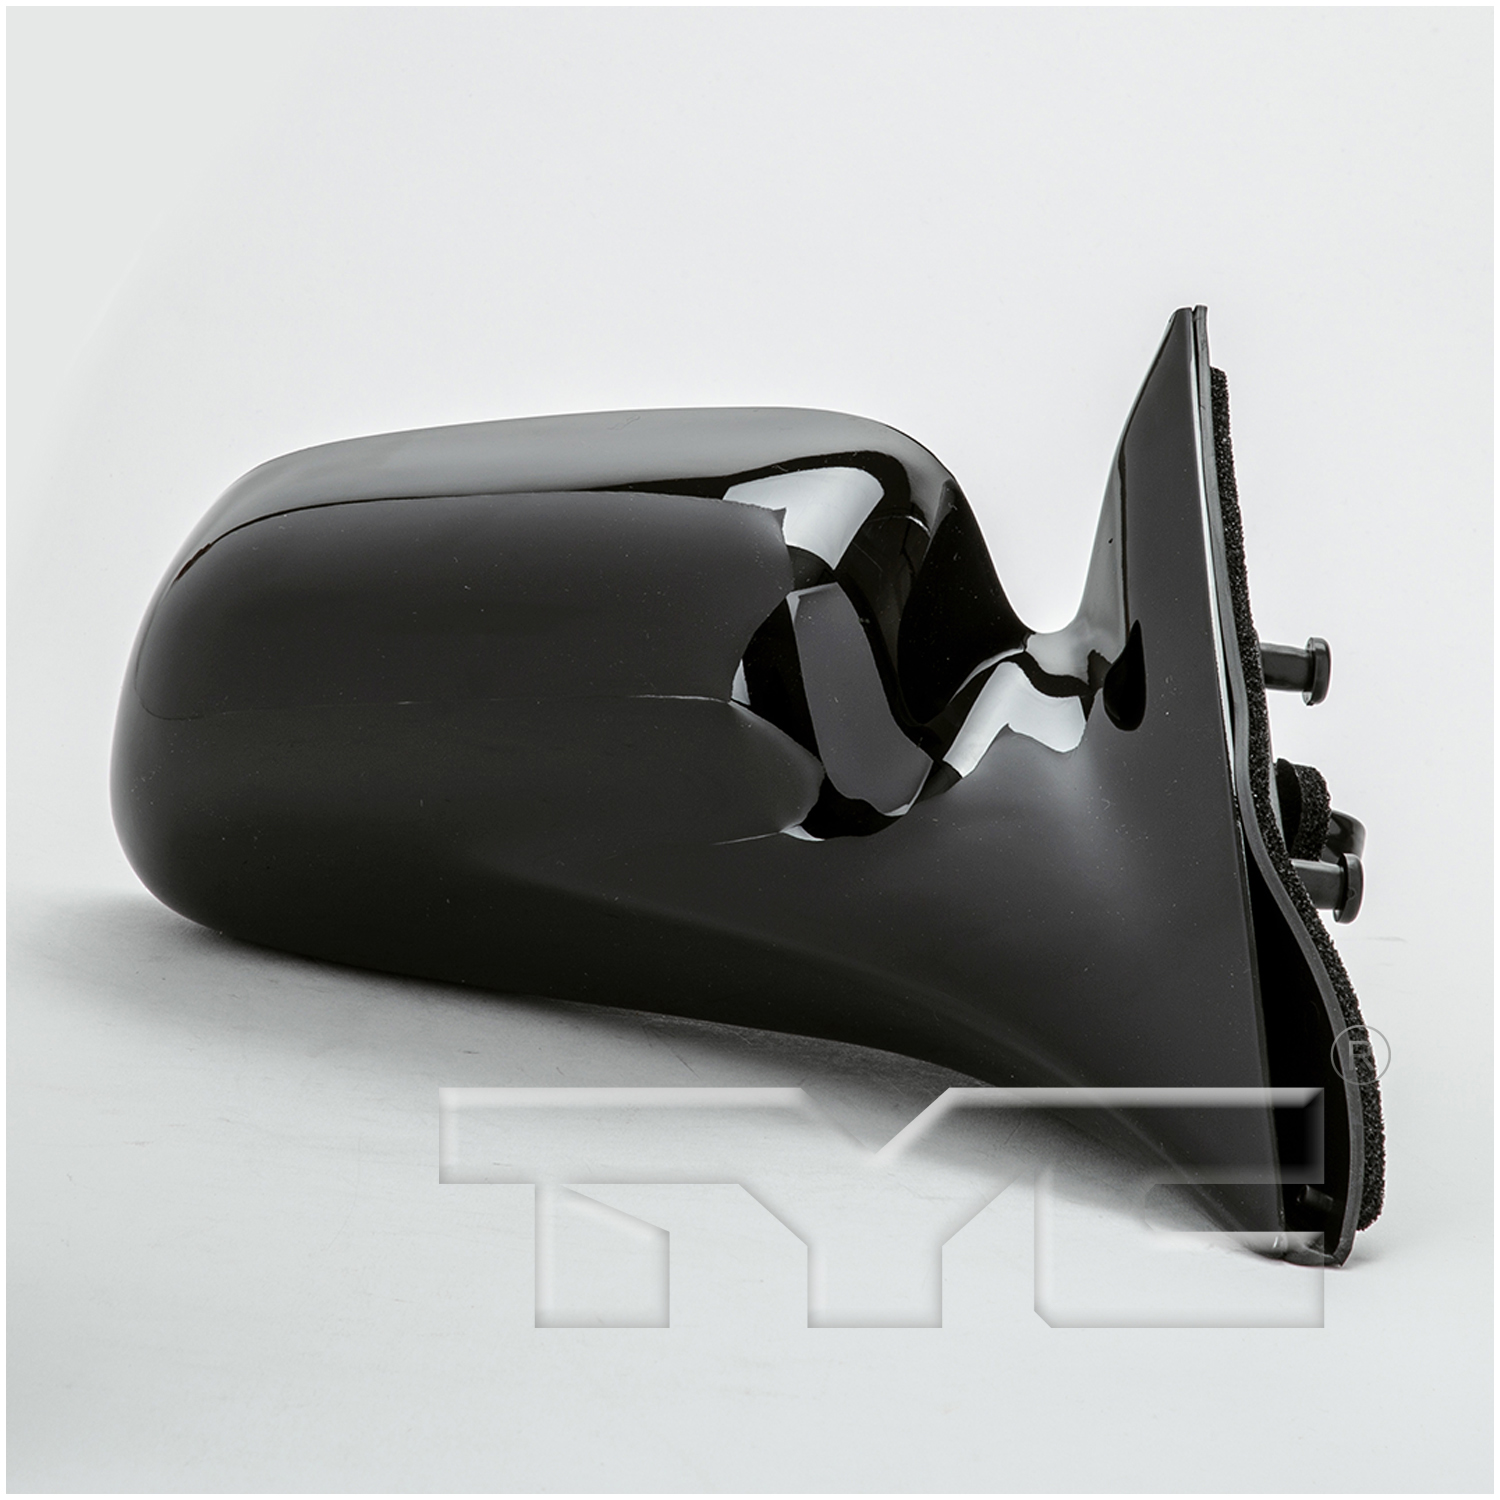 Aftermarket MIRRORS for MITSUBISHI - GALANT, GALANT,99-03,RT Mirror outside rear view